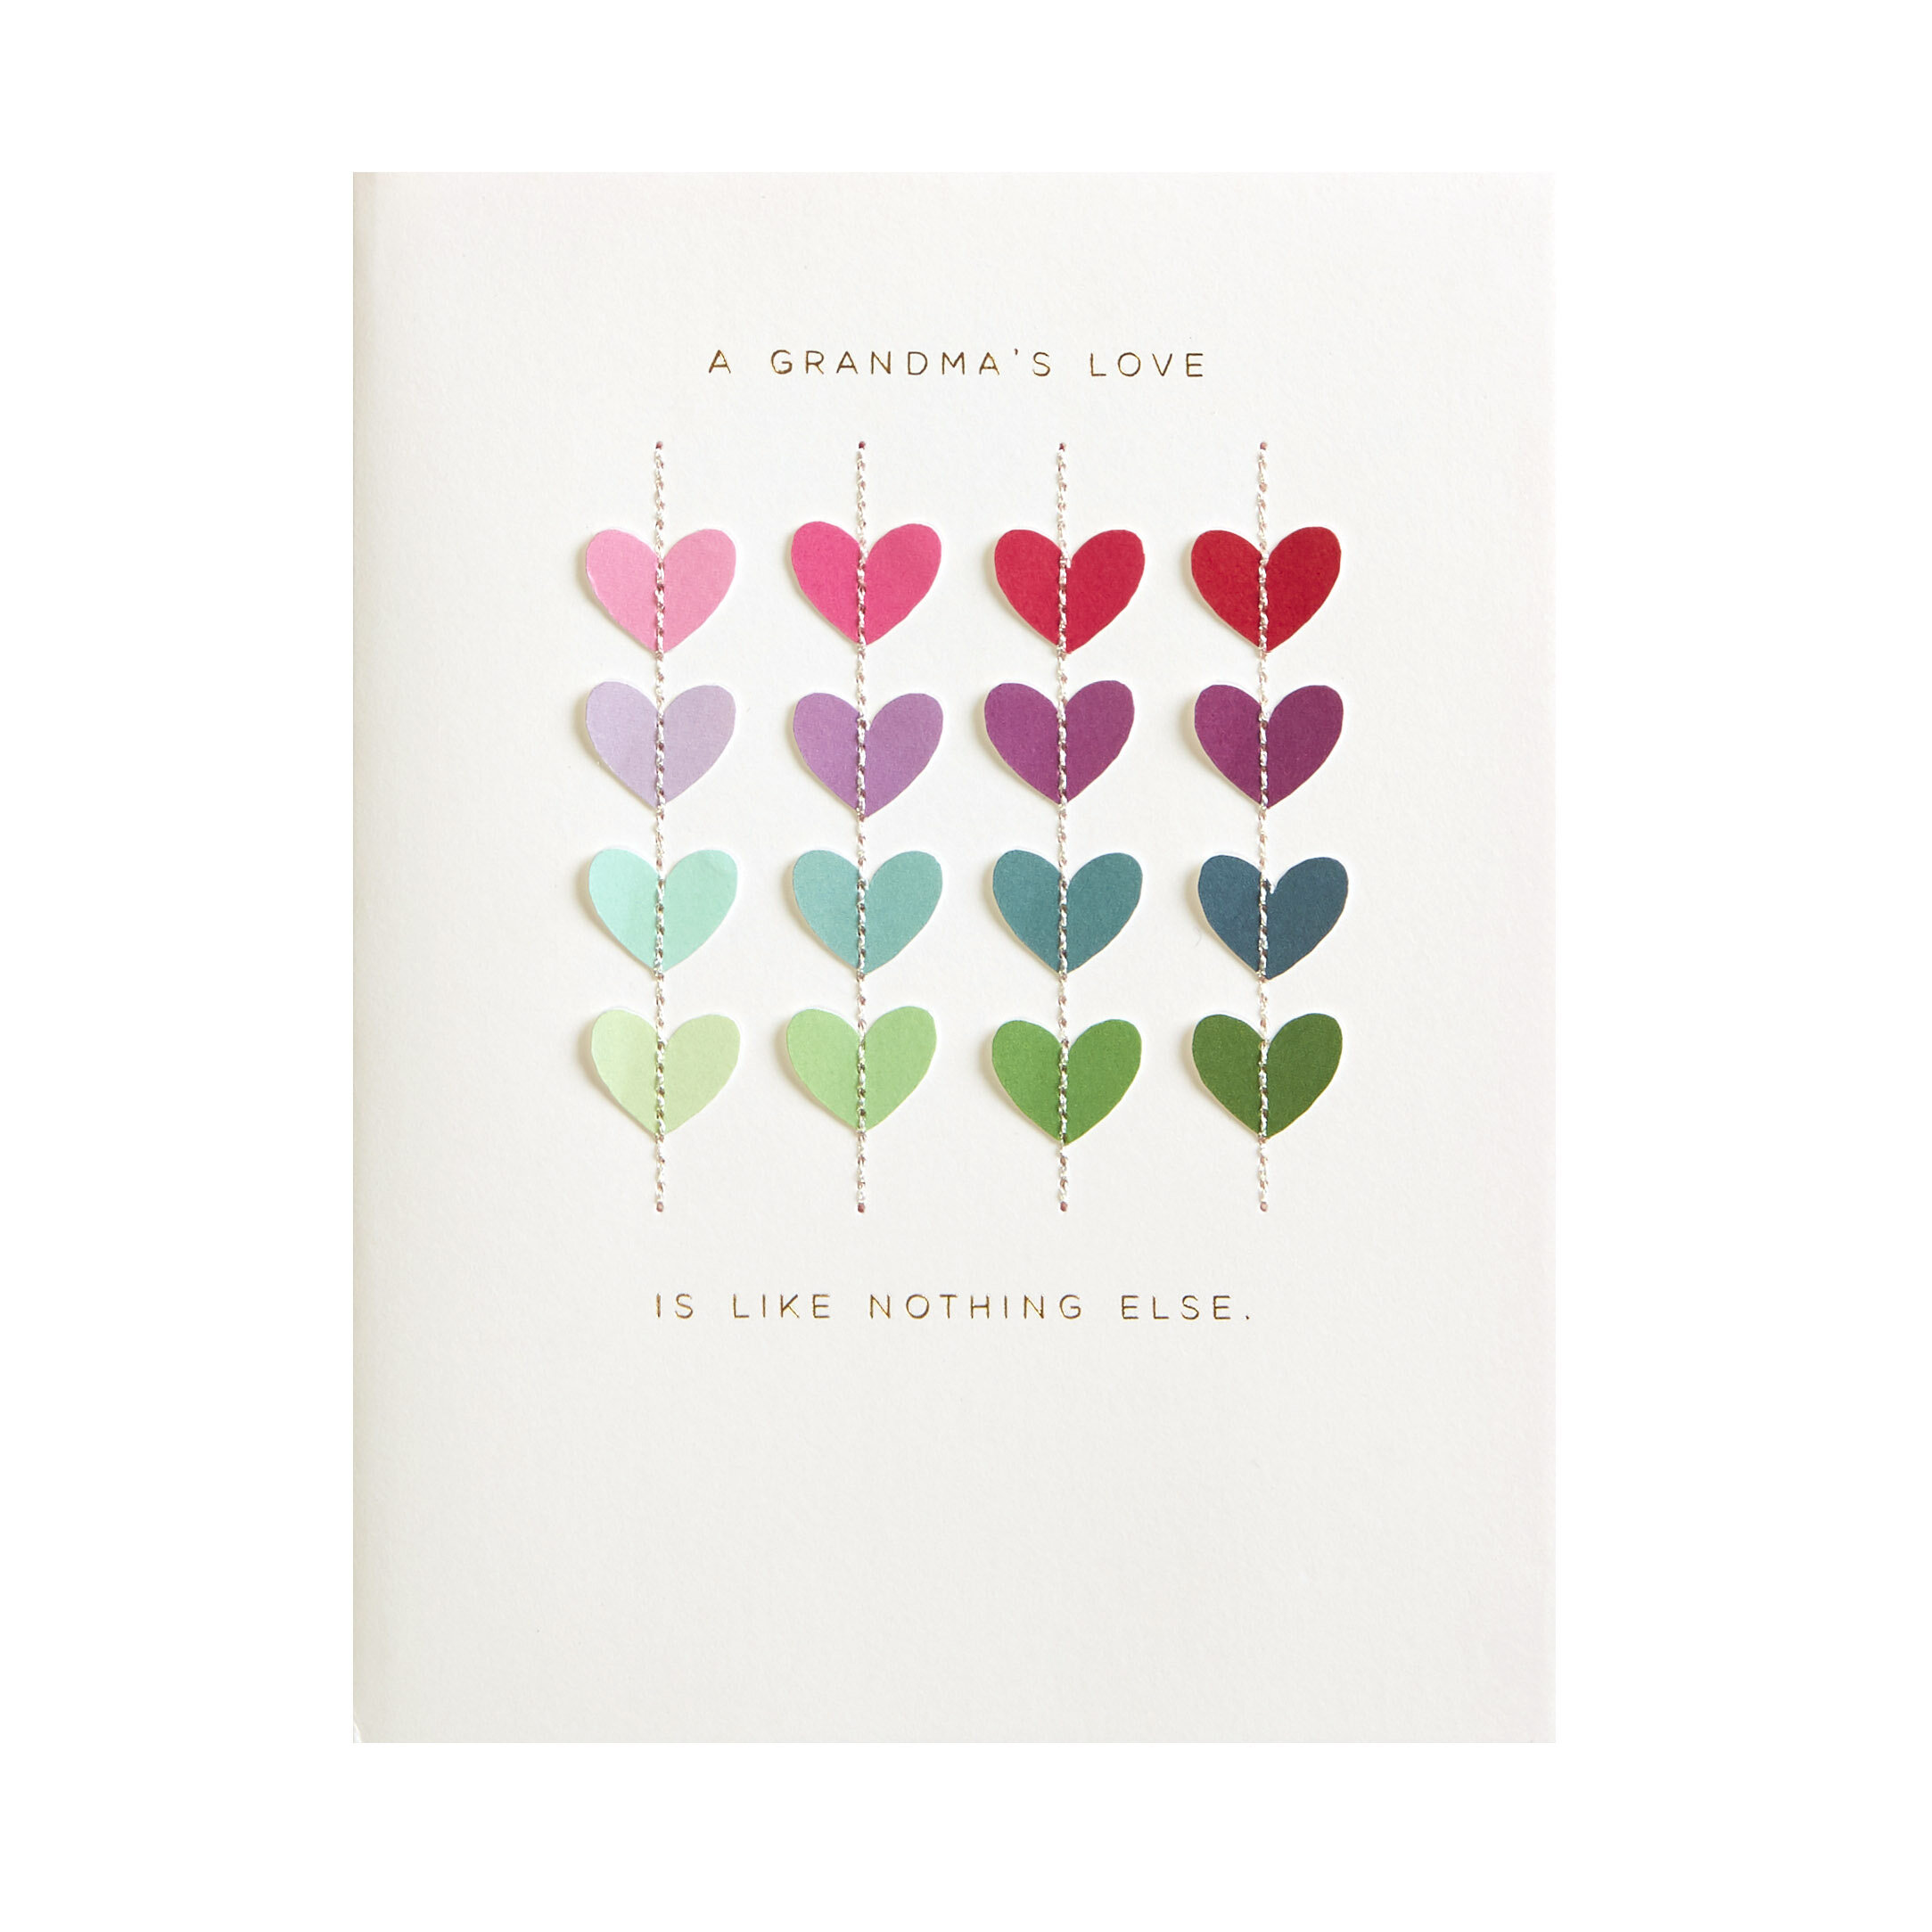 Buy Grandma Hearts Birthday Card — Larkwood Studio Buy Stationery and  Greeting Cards - The gift of personal expression